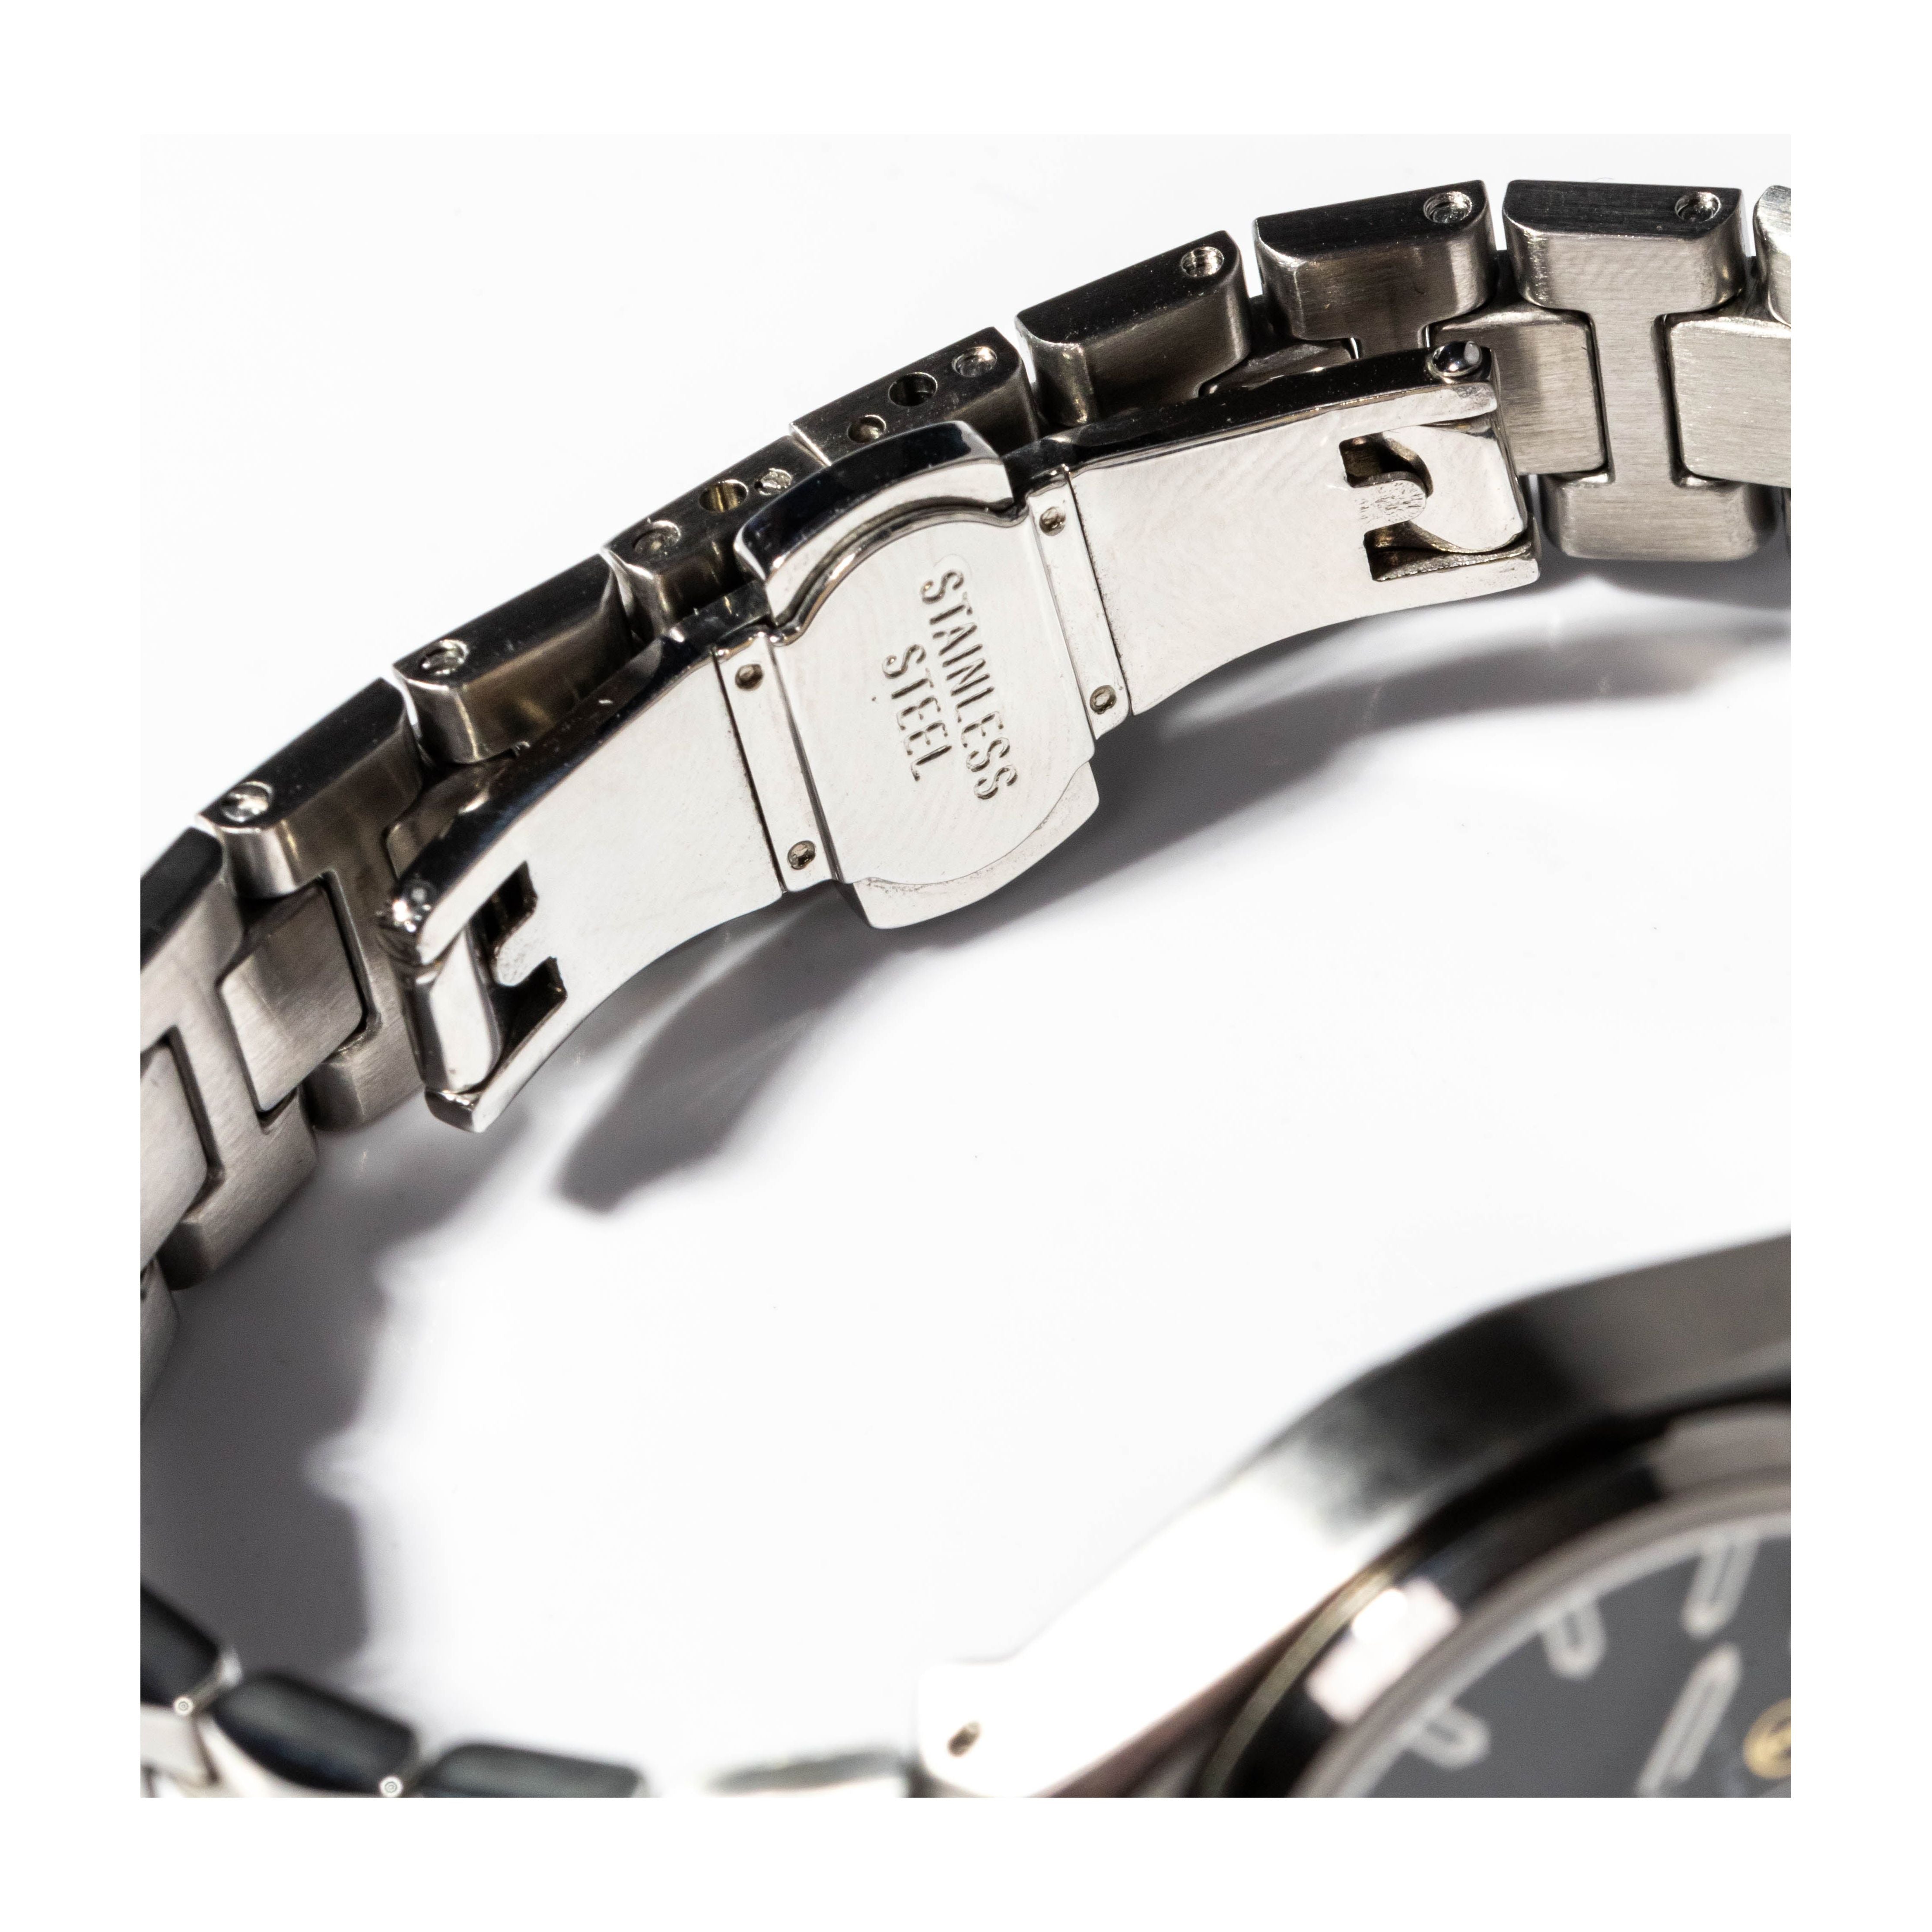 The “Meridian” sports watch for women. Coming Soon